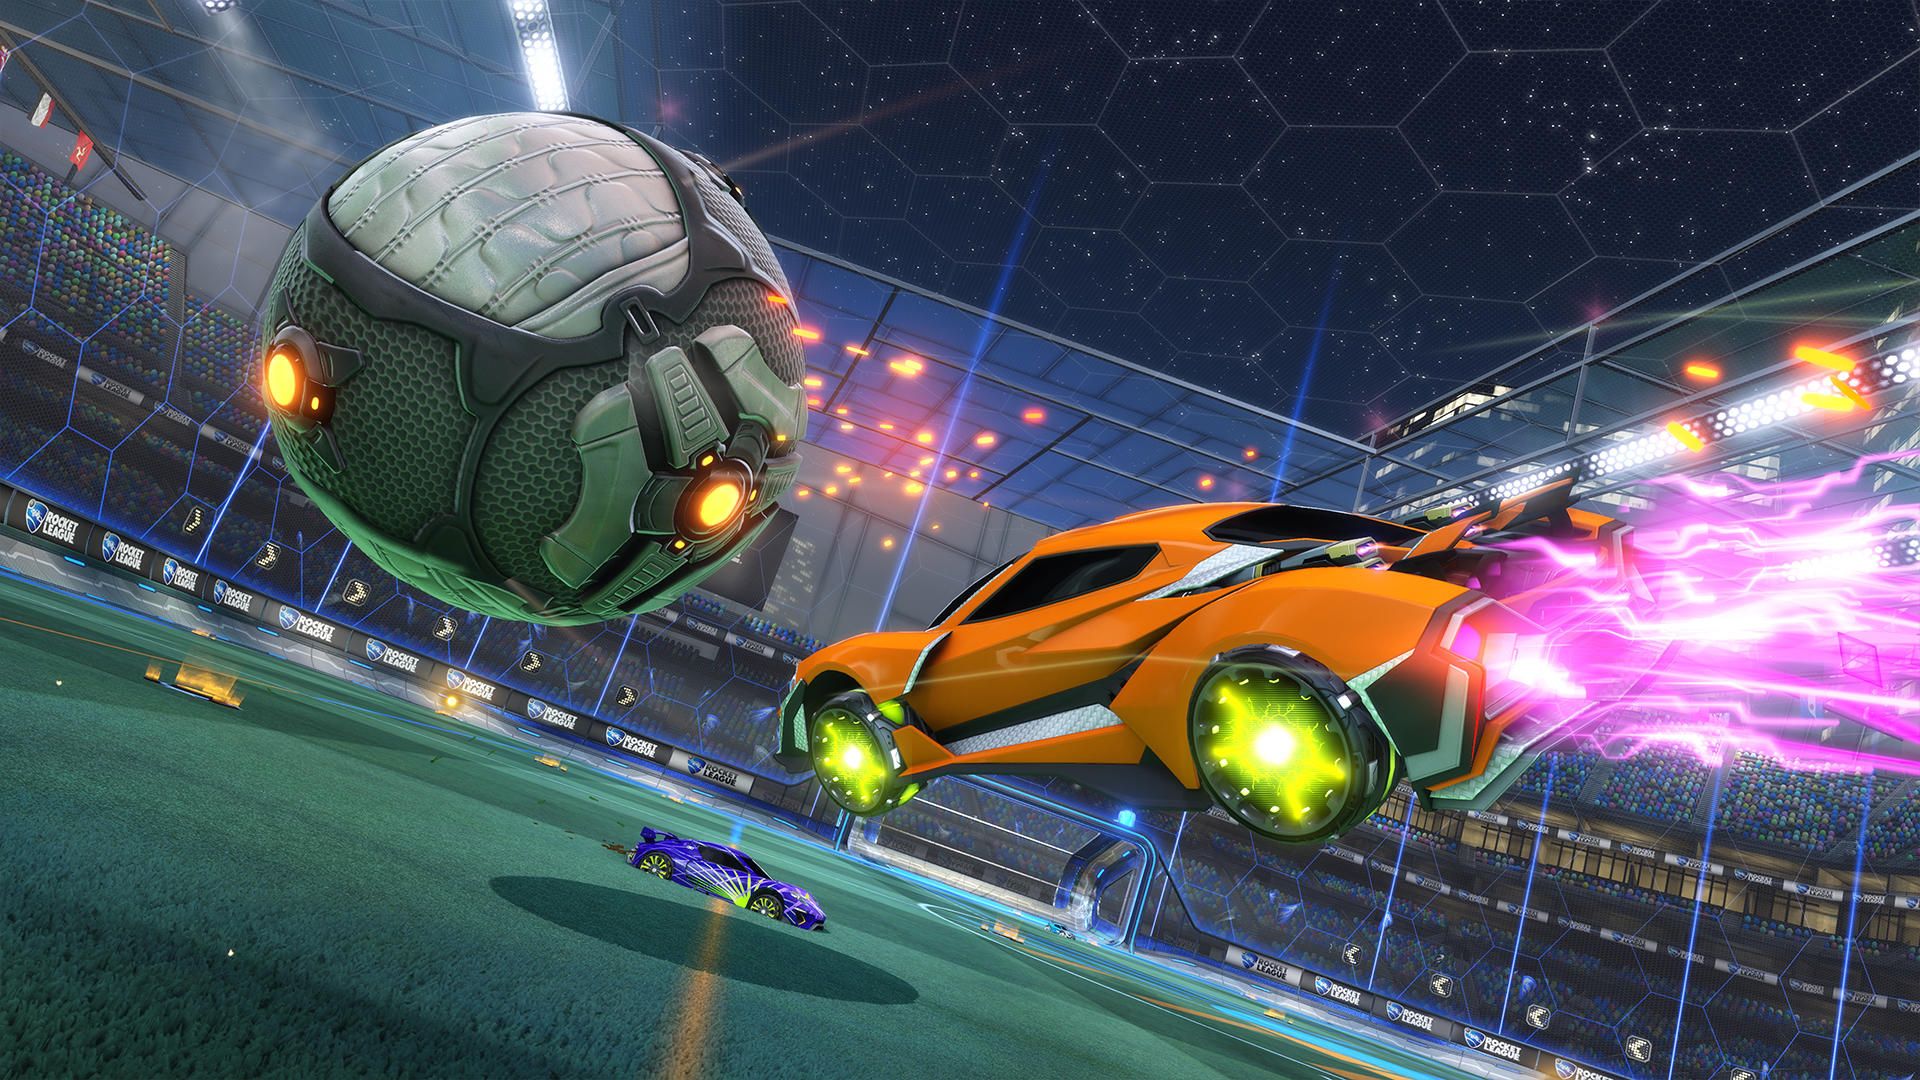 Rocket League not working: How to fix Rocket League stuck on loading screen in PS4, PS5?